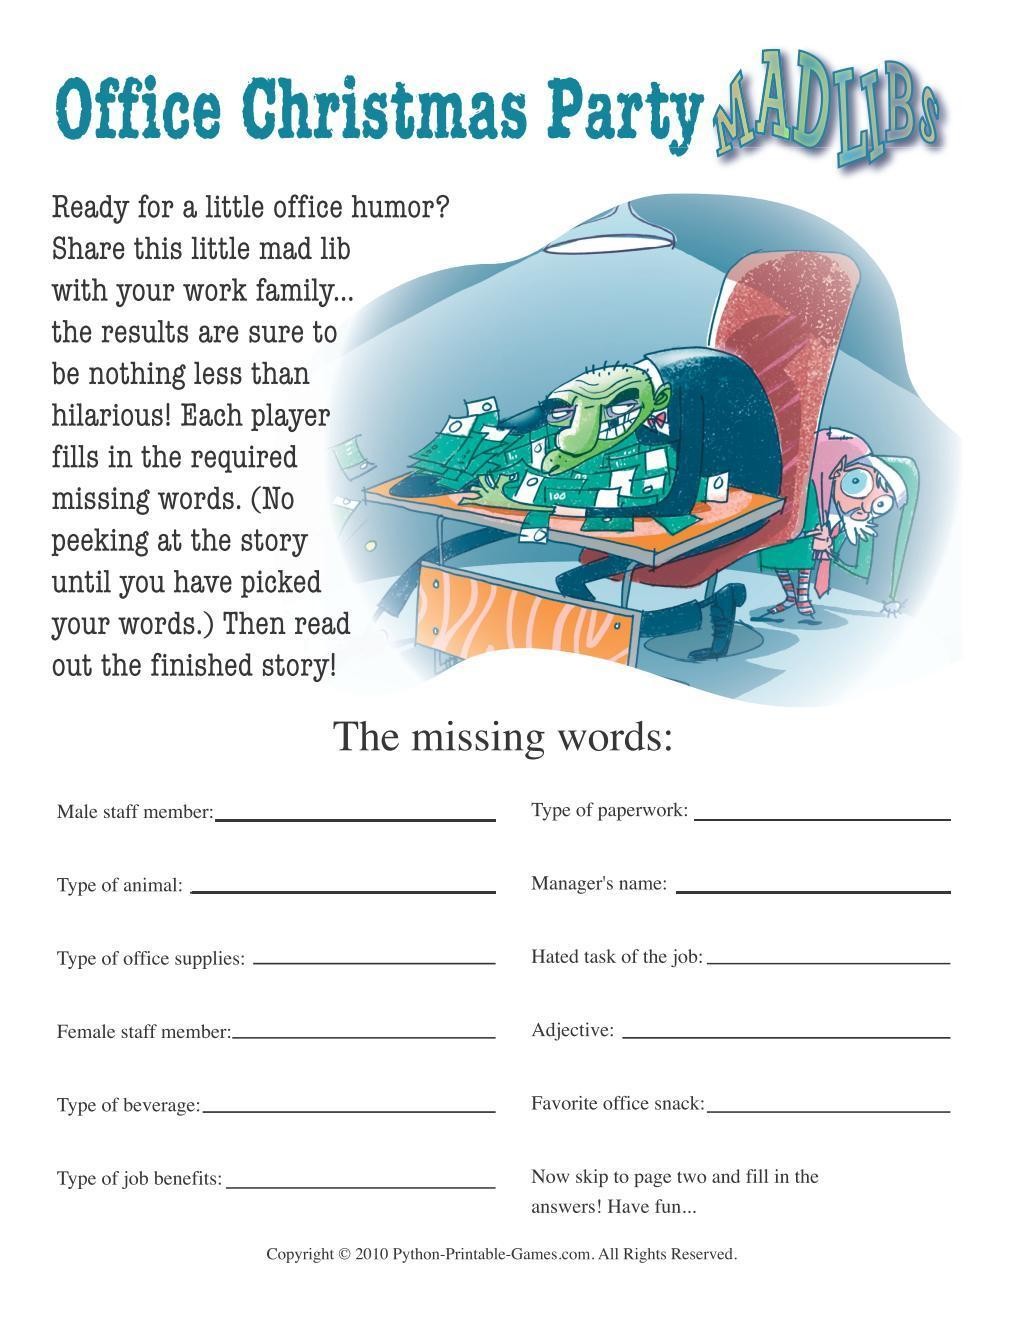 holiday-office-party-games-free-printable-web-give-each-guest-a-piece-of-paper-and-a-pen